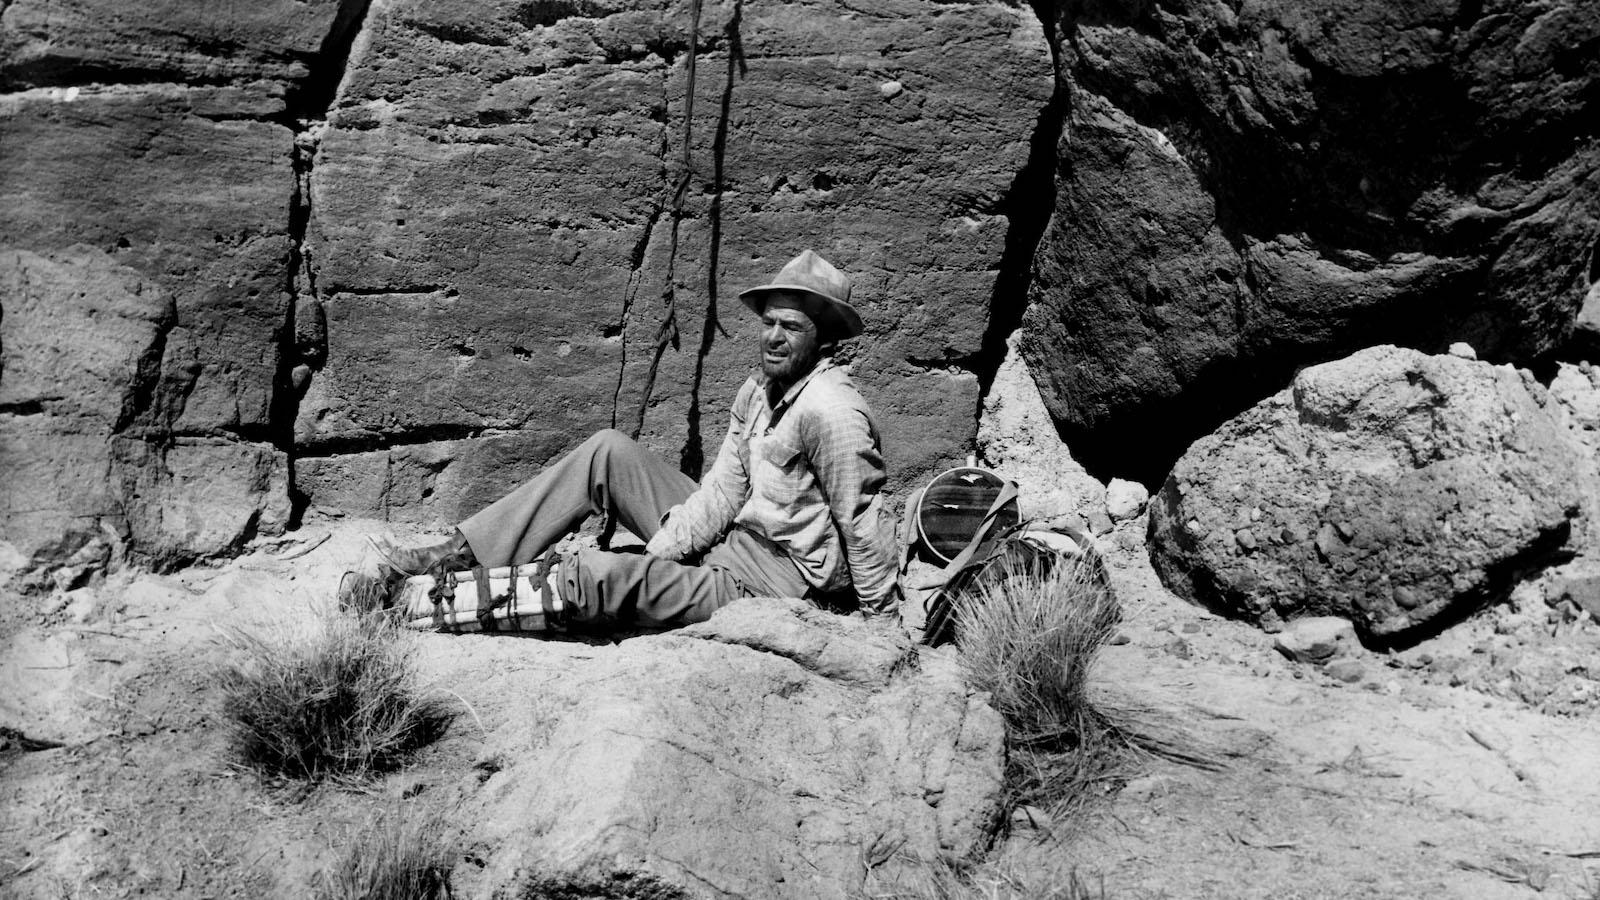 A man in a hat since in the desert by the side of a rocky mountain wall, holding his injured leg.